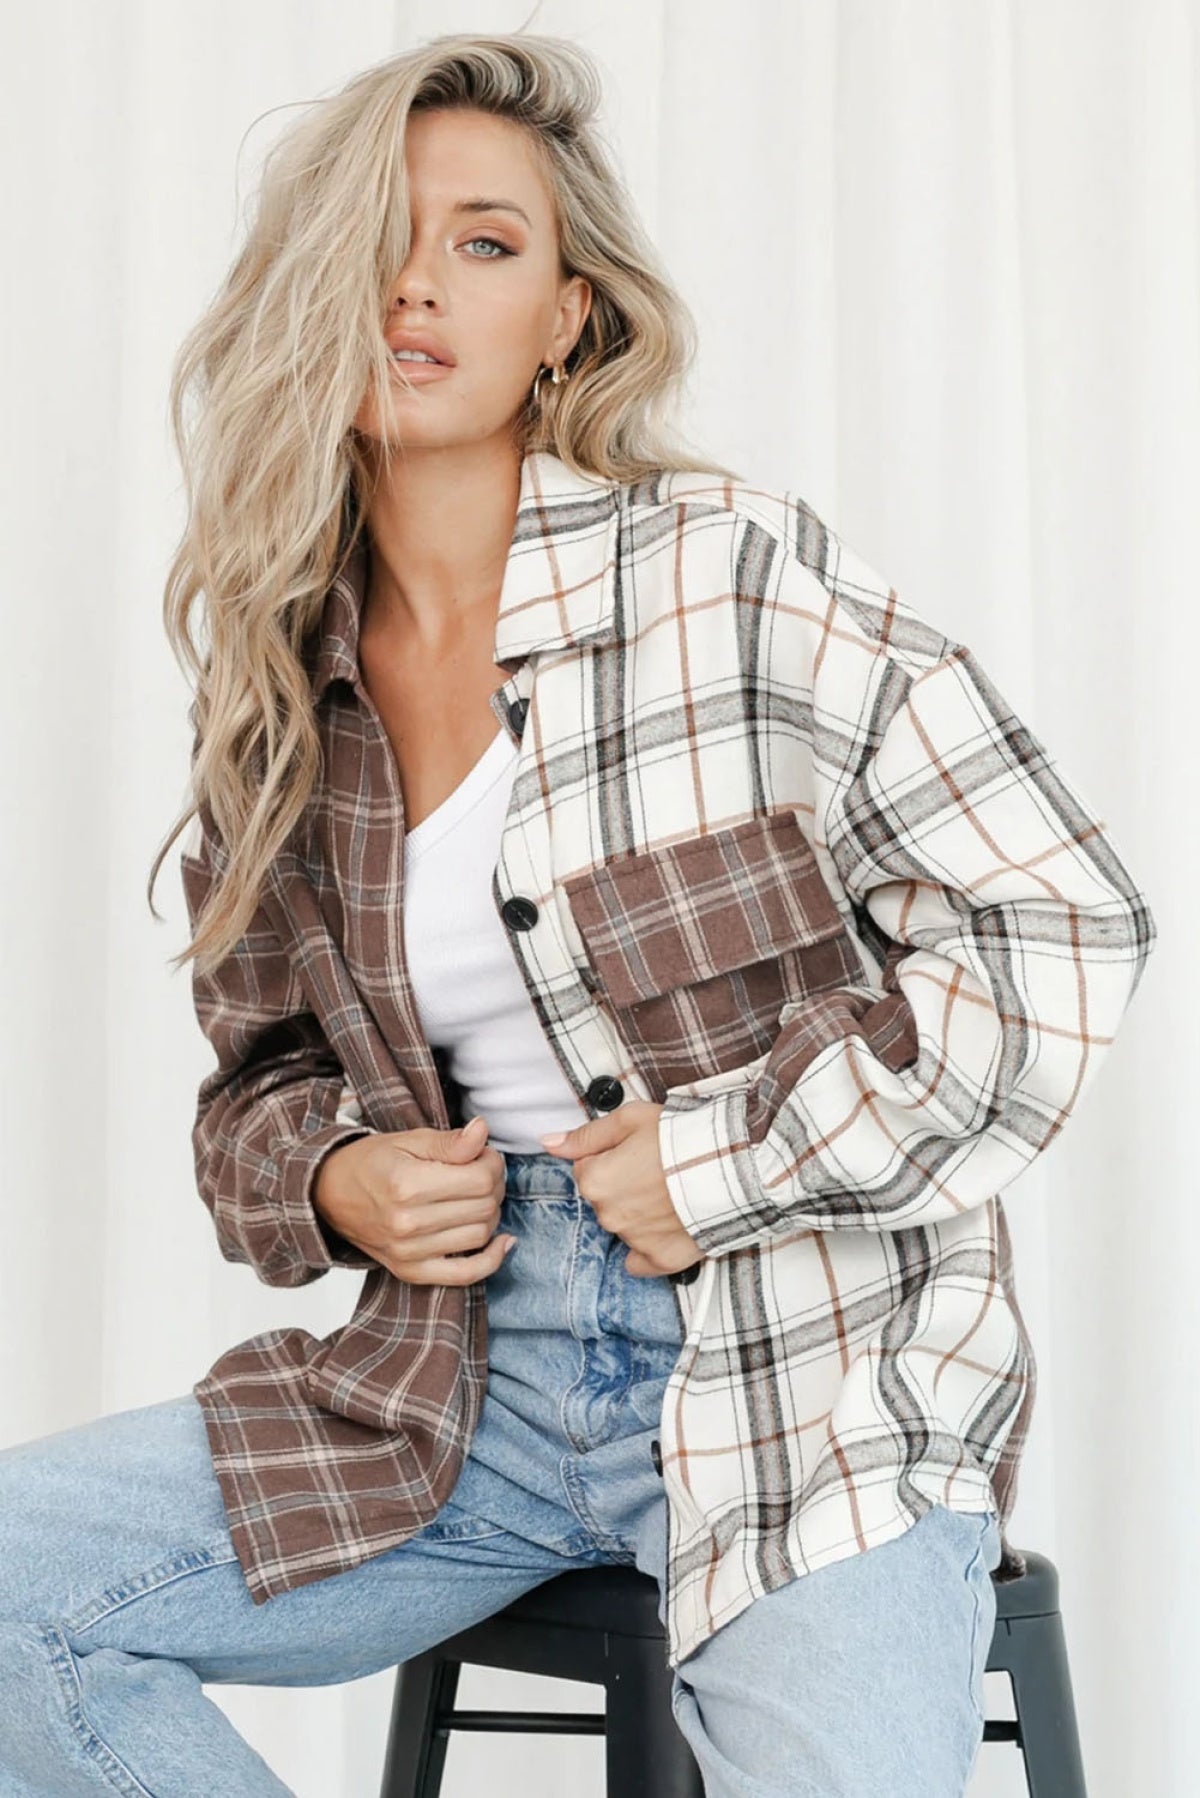 Brown Mixed Plaid Soft Oversized Shirt